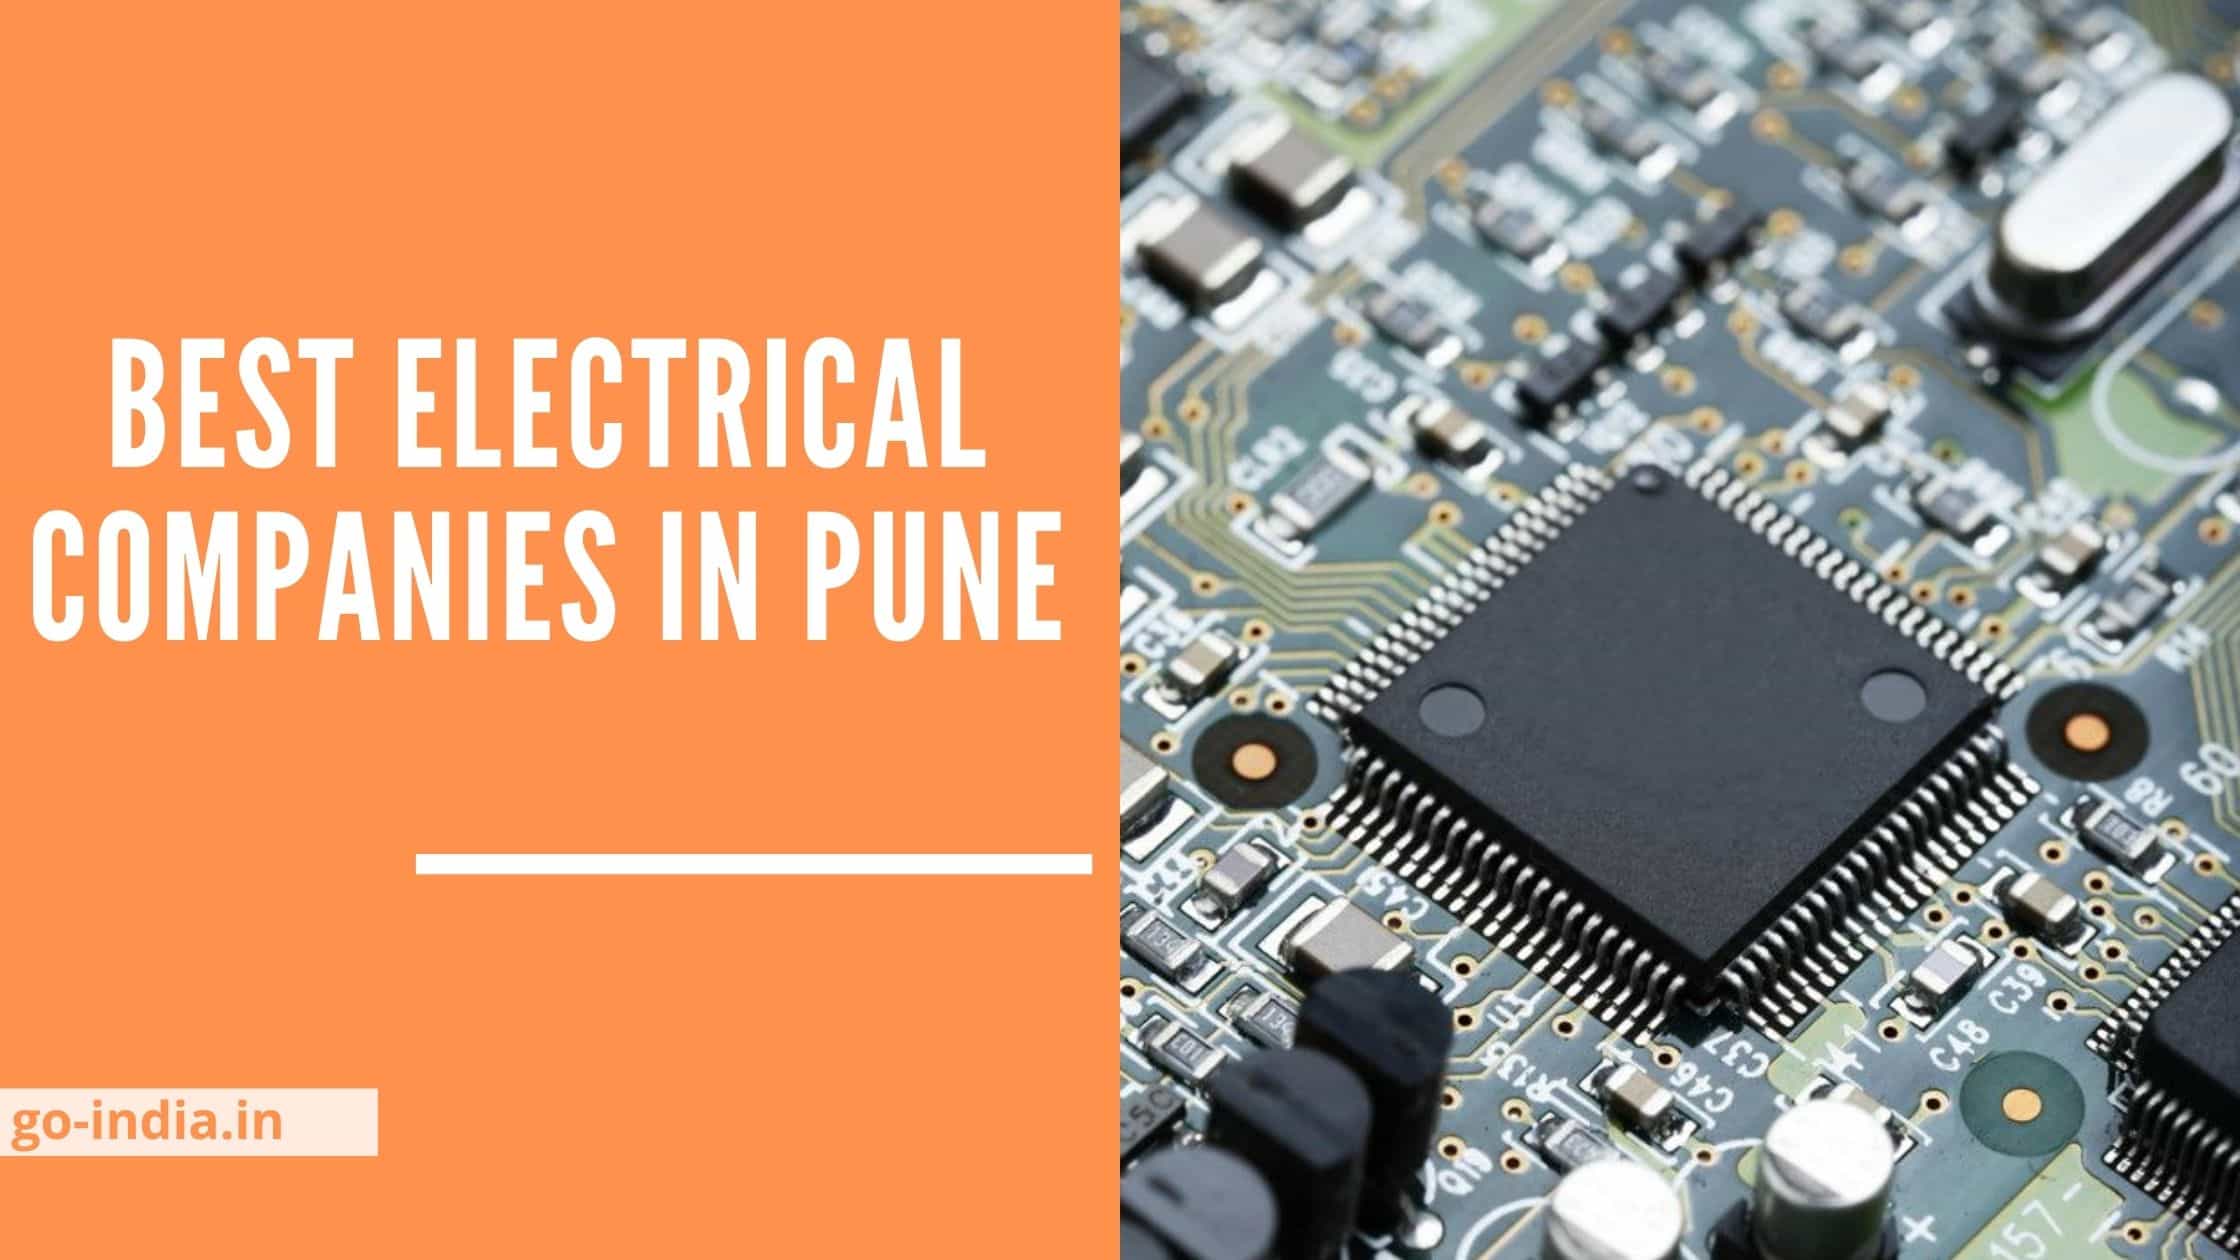 Best Electrical Companies in Pune